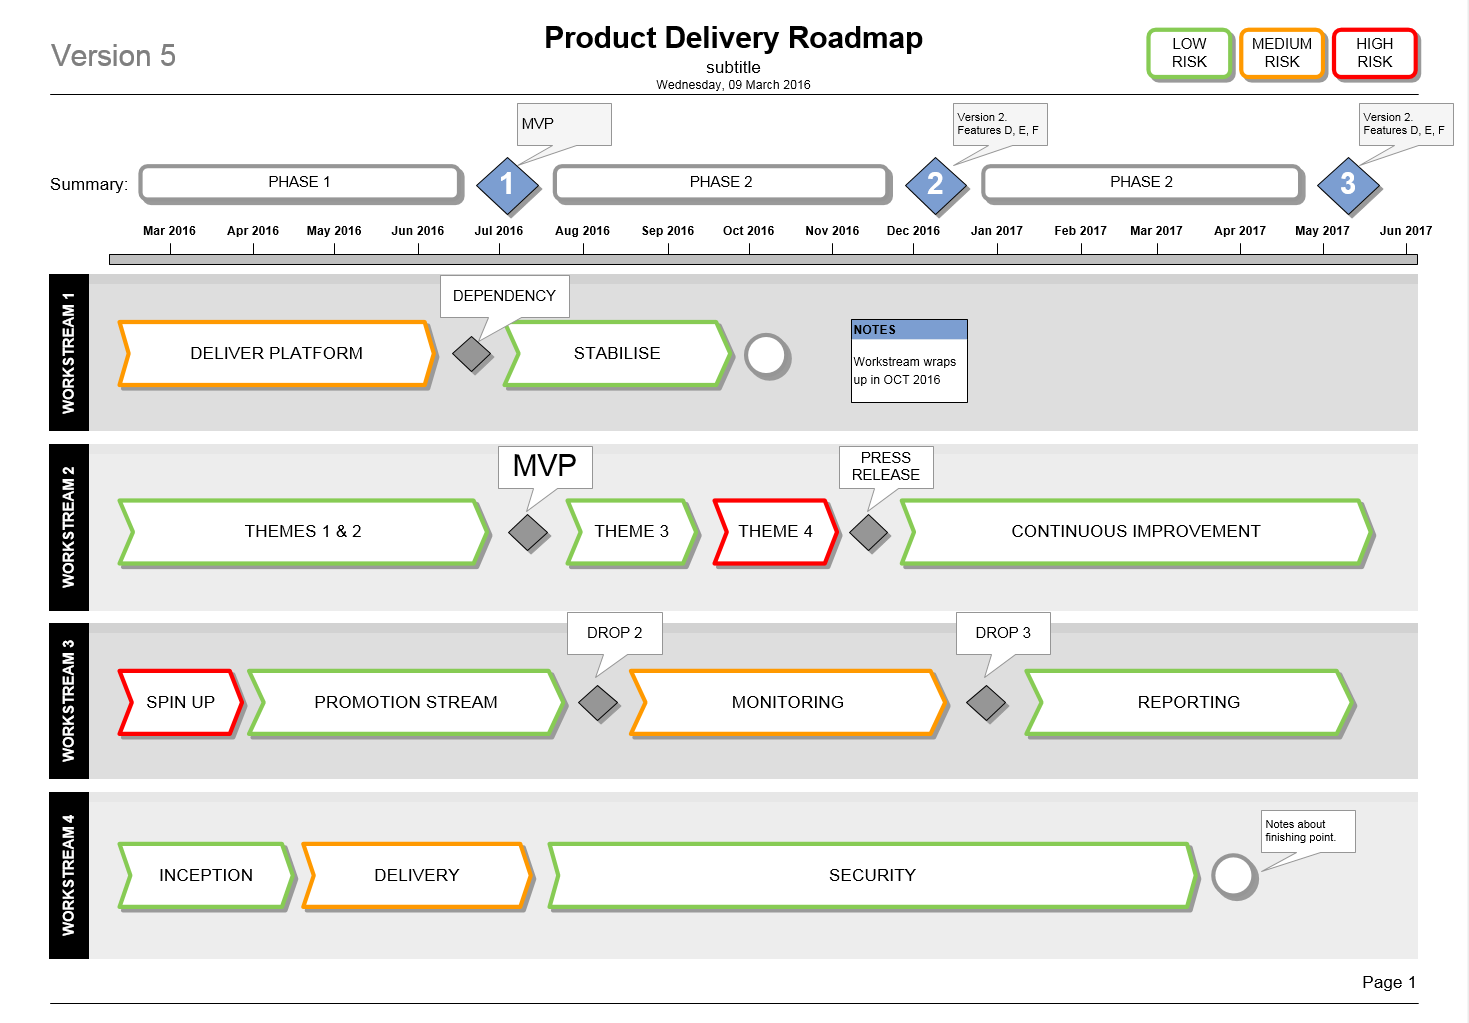 Product Delivery Plan Roadmap Template Microsoft Visio 